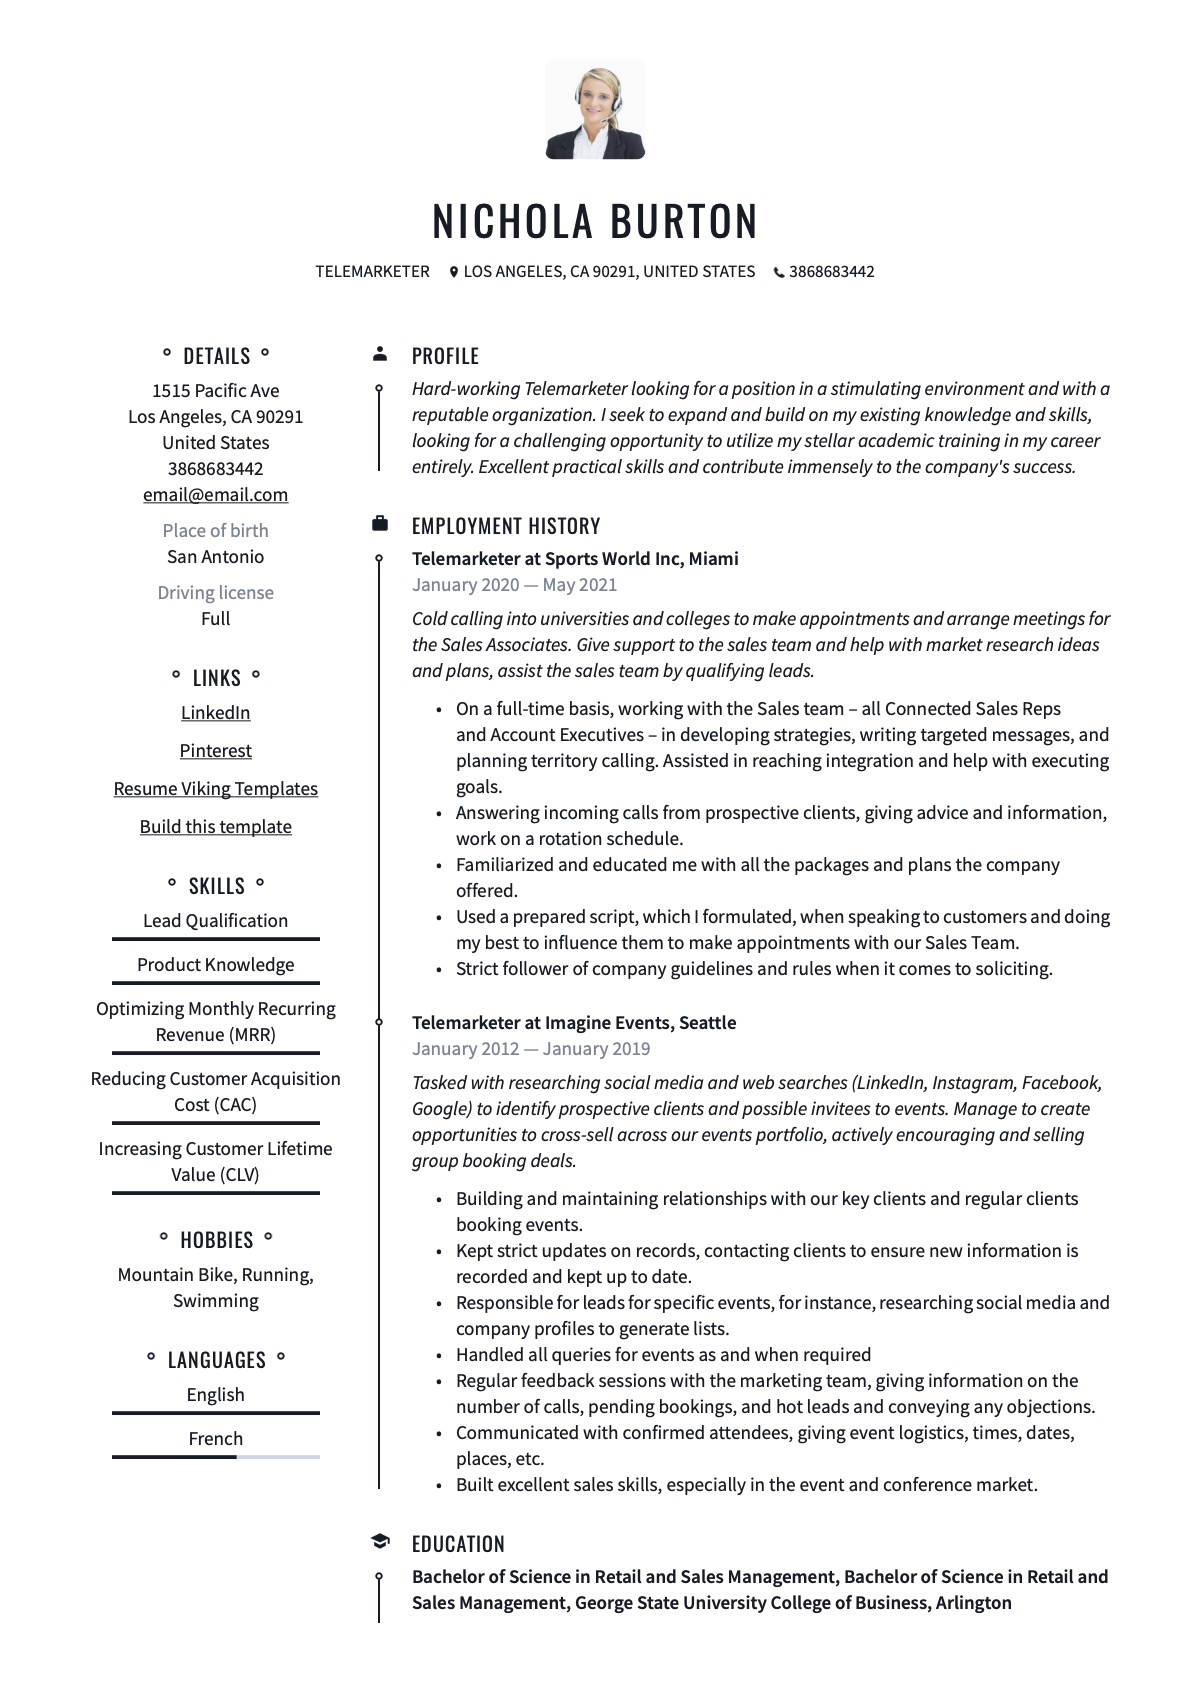 Professional Telemarketer Resume Example